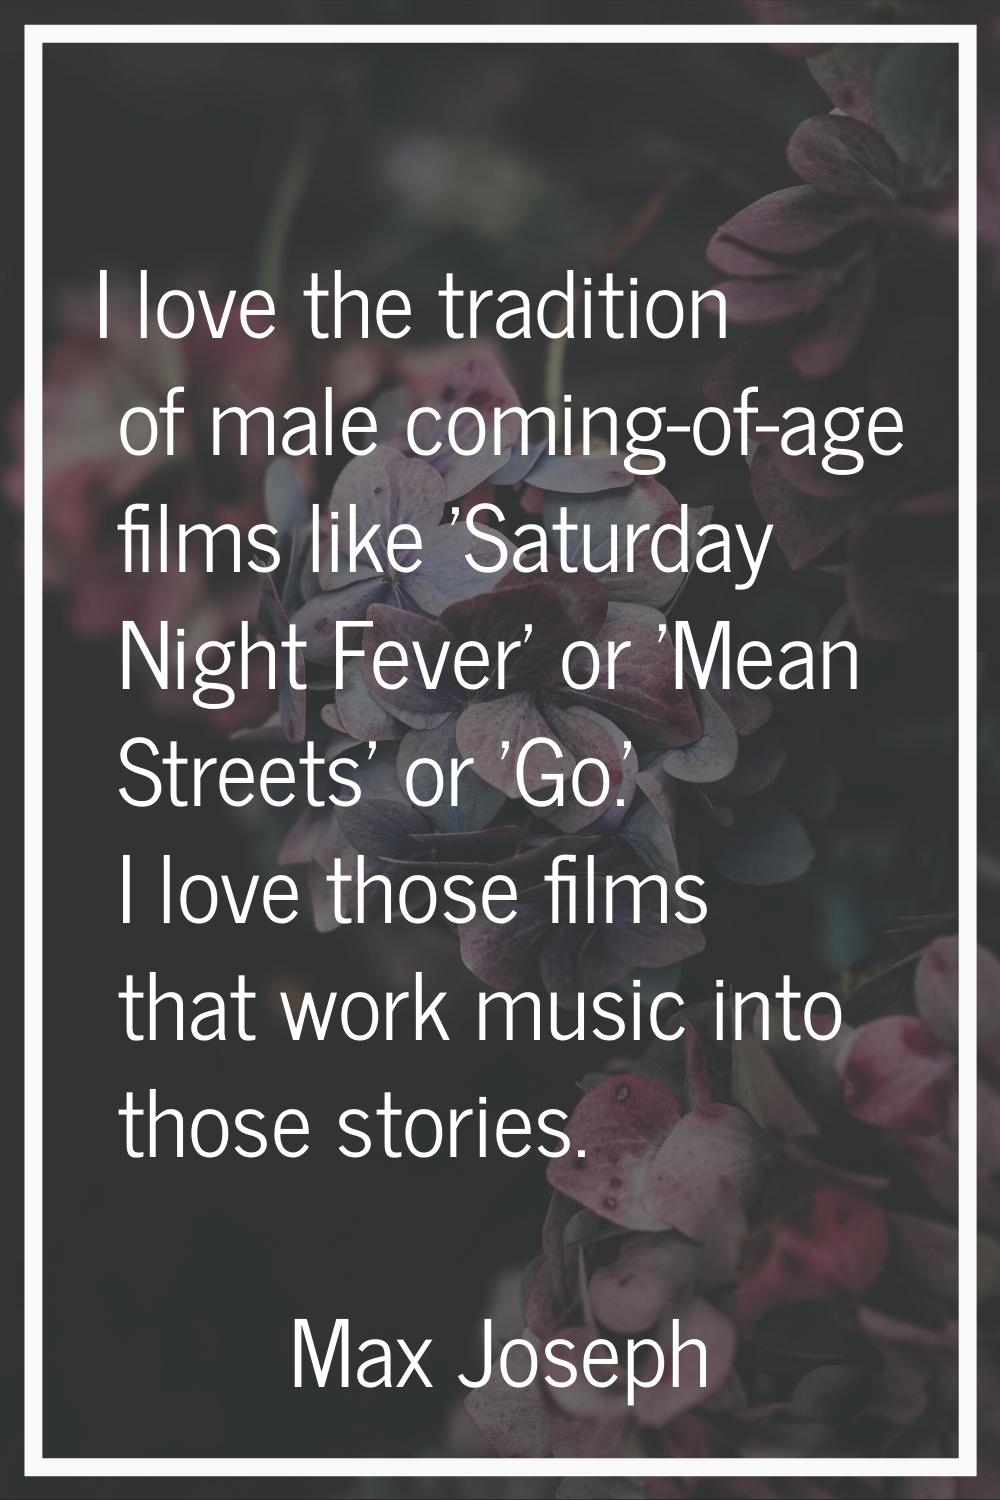 I love the tradition of male coming-of-age films like 'Saturday Night Fever' or 'Mean Streets' or '